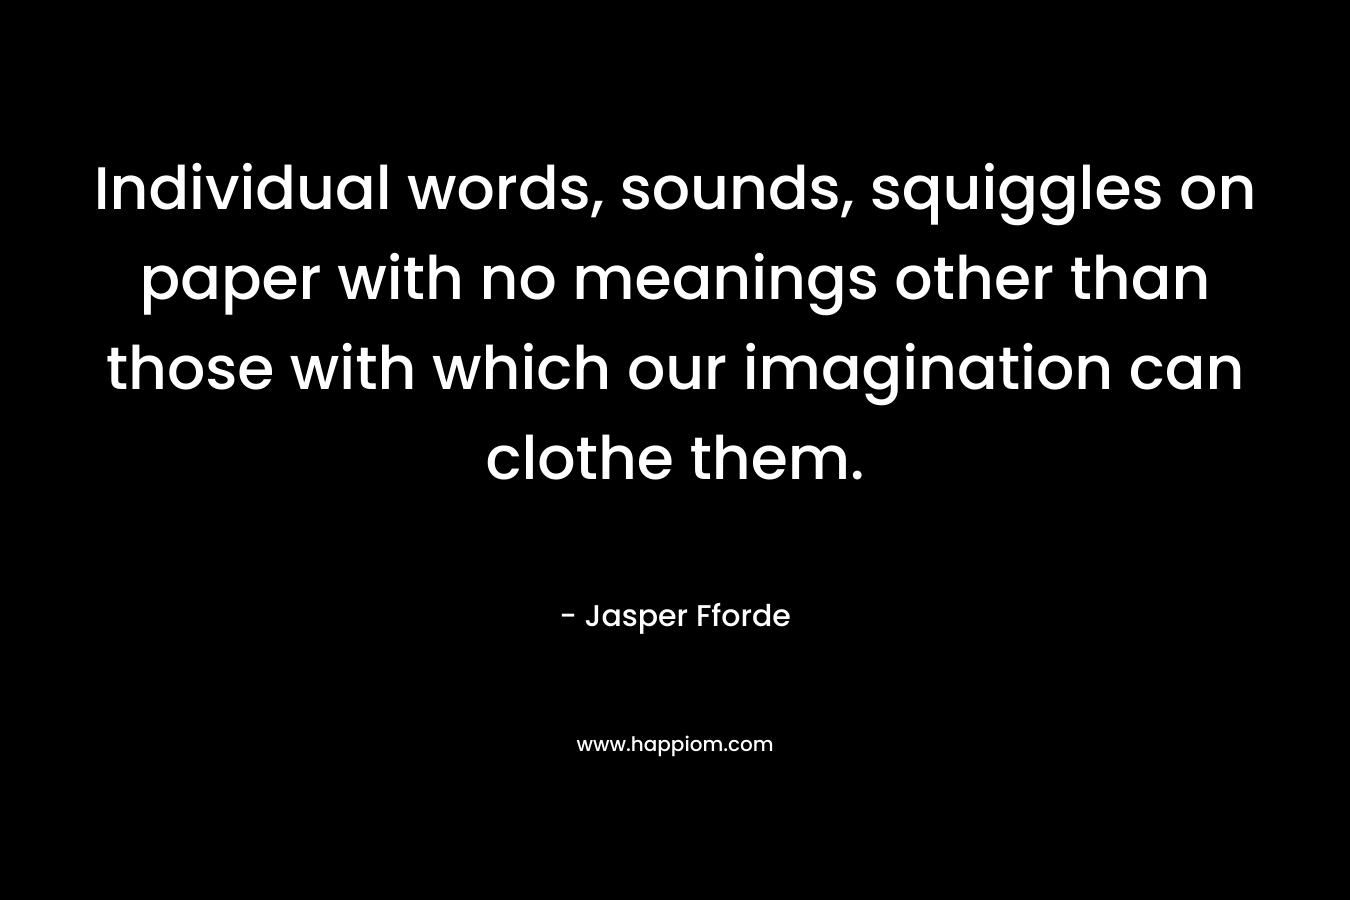 Individual words, sounds, squiggles on paper with no meanings other than those with which our imagination can clothe them.